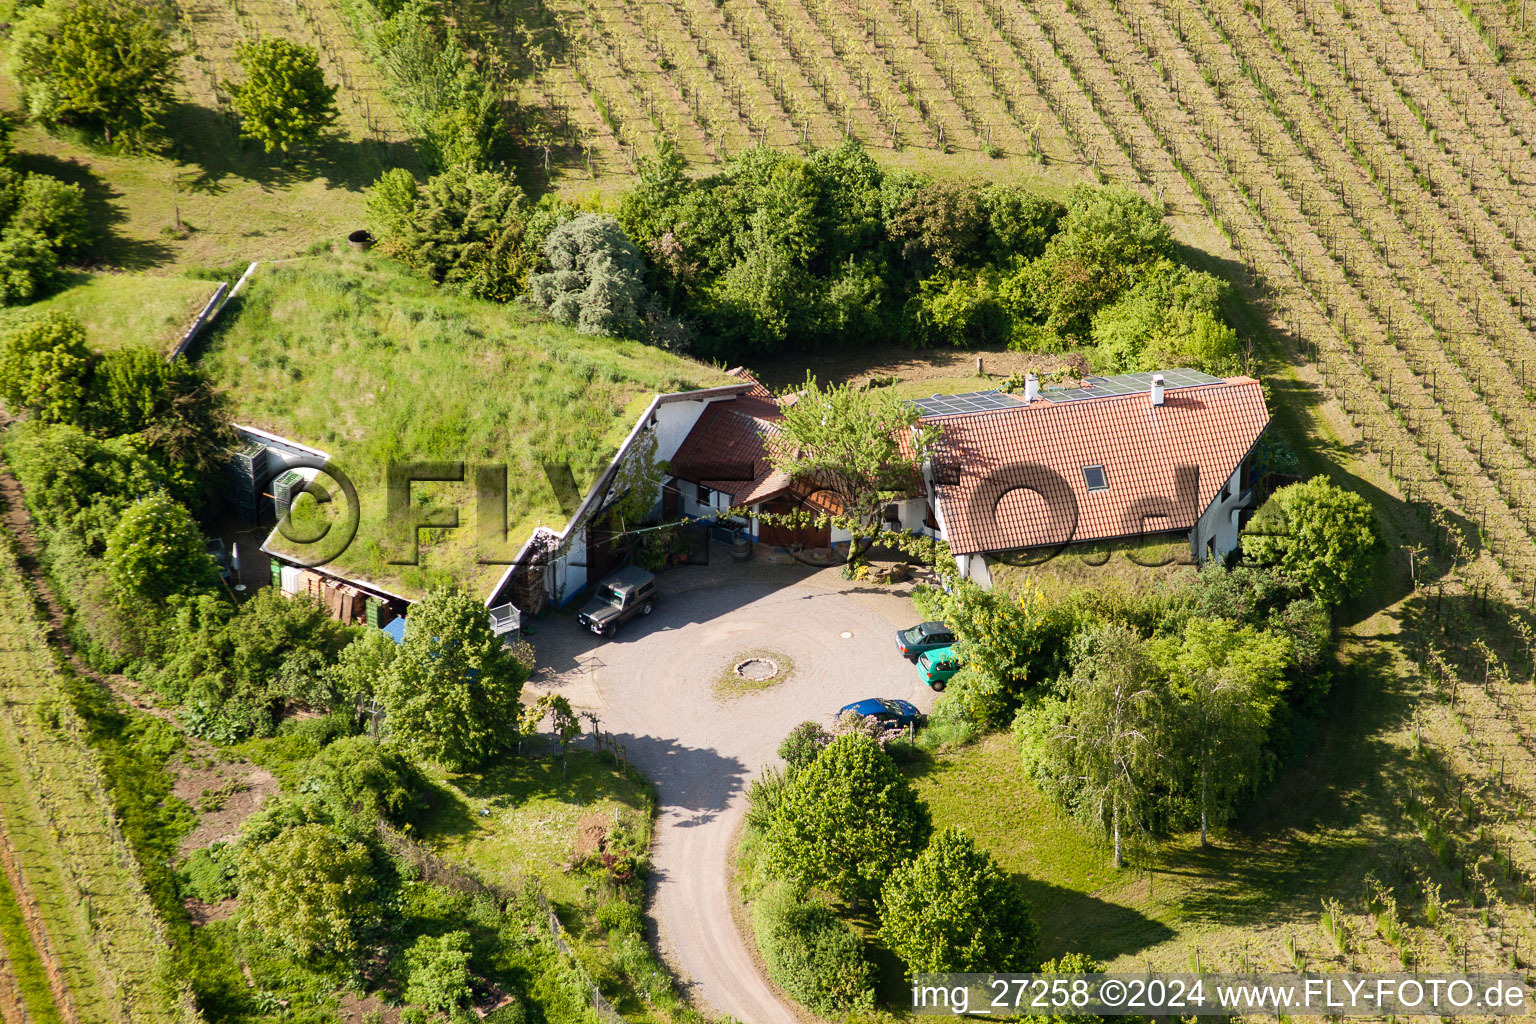 Aerial photograpy of BiolandViticulture Unterm Grassdach Winery Marzolph in the district Wollmesheim in Landau in der Pfalz in the state Rhineland-Palatinate, Germany